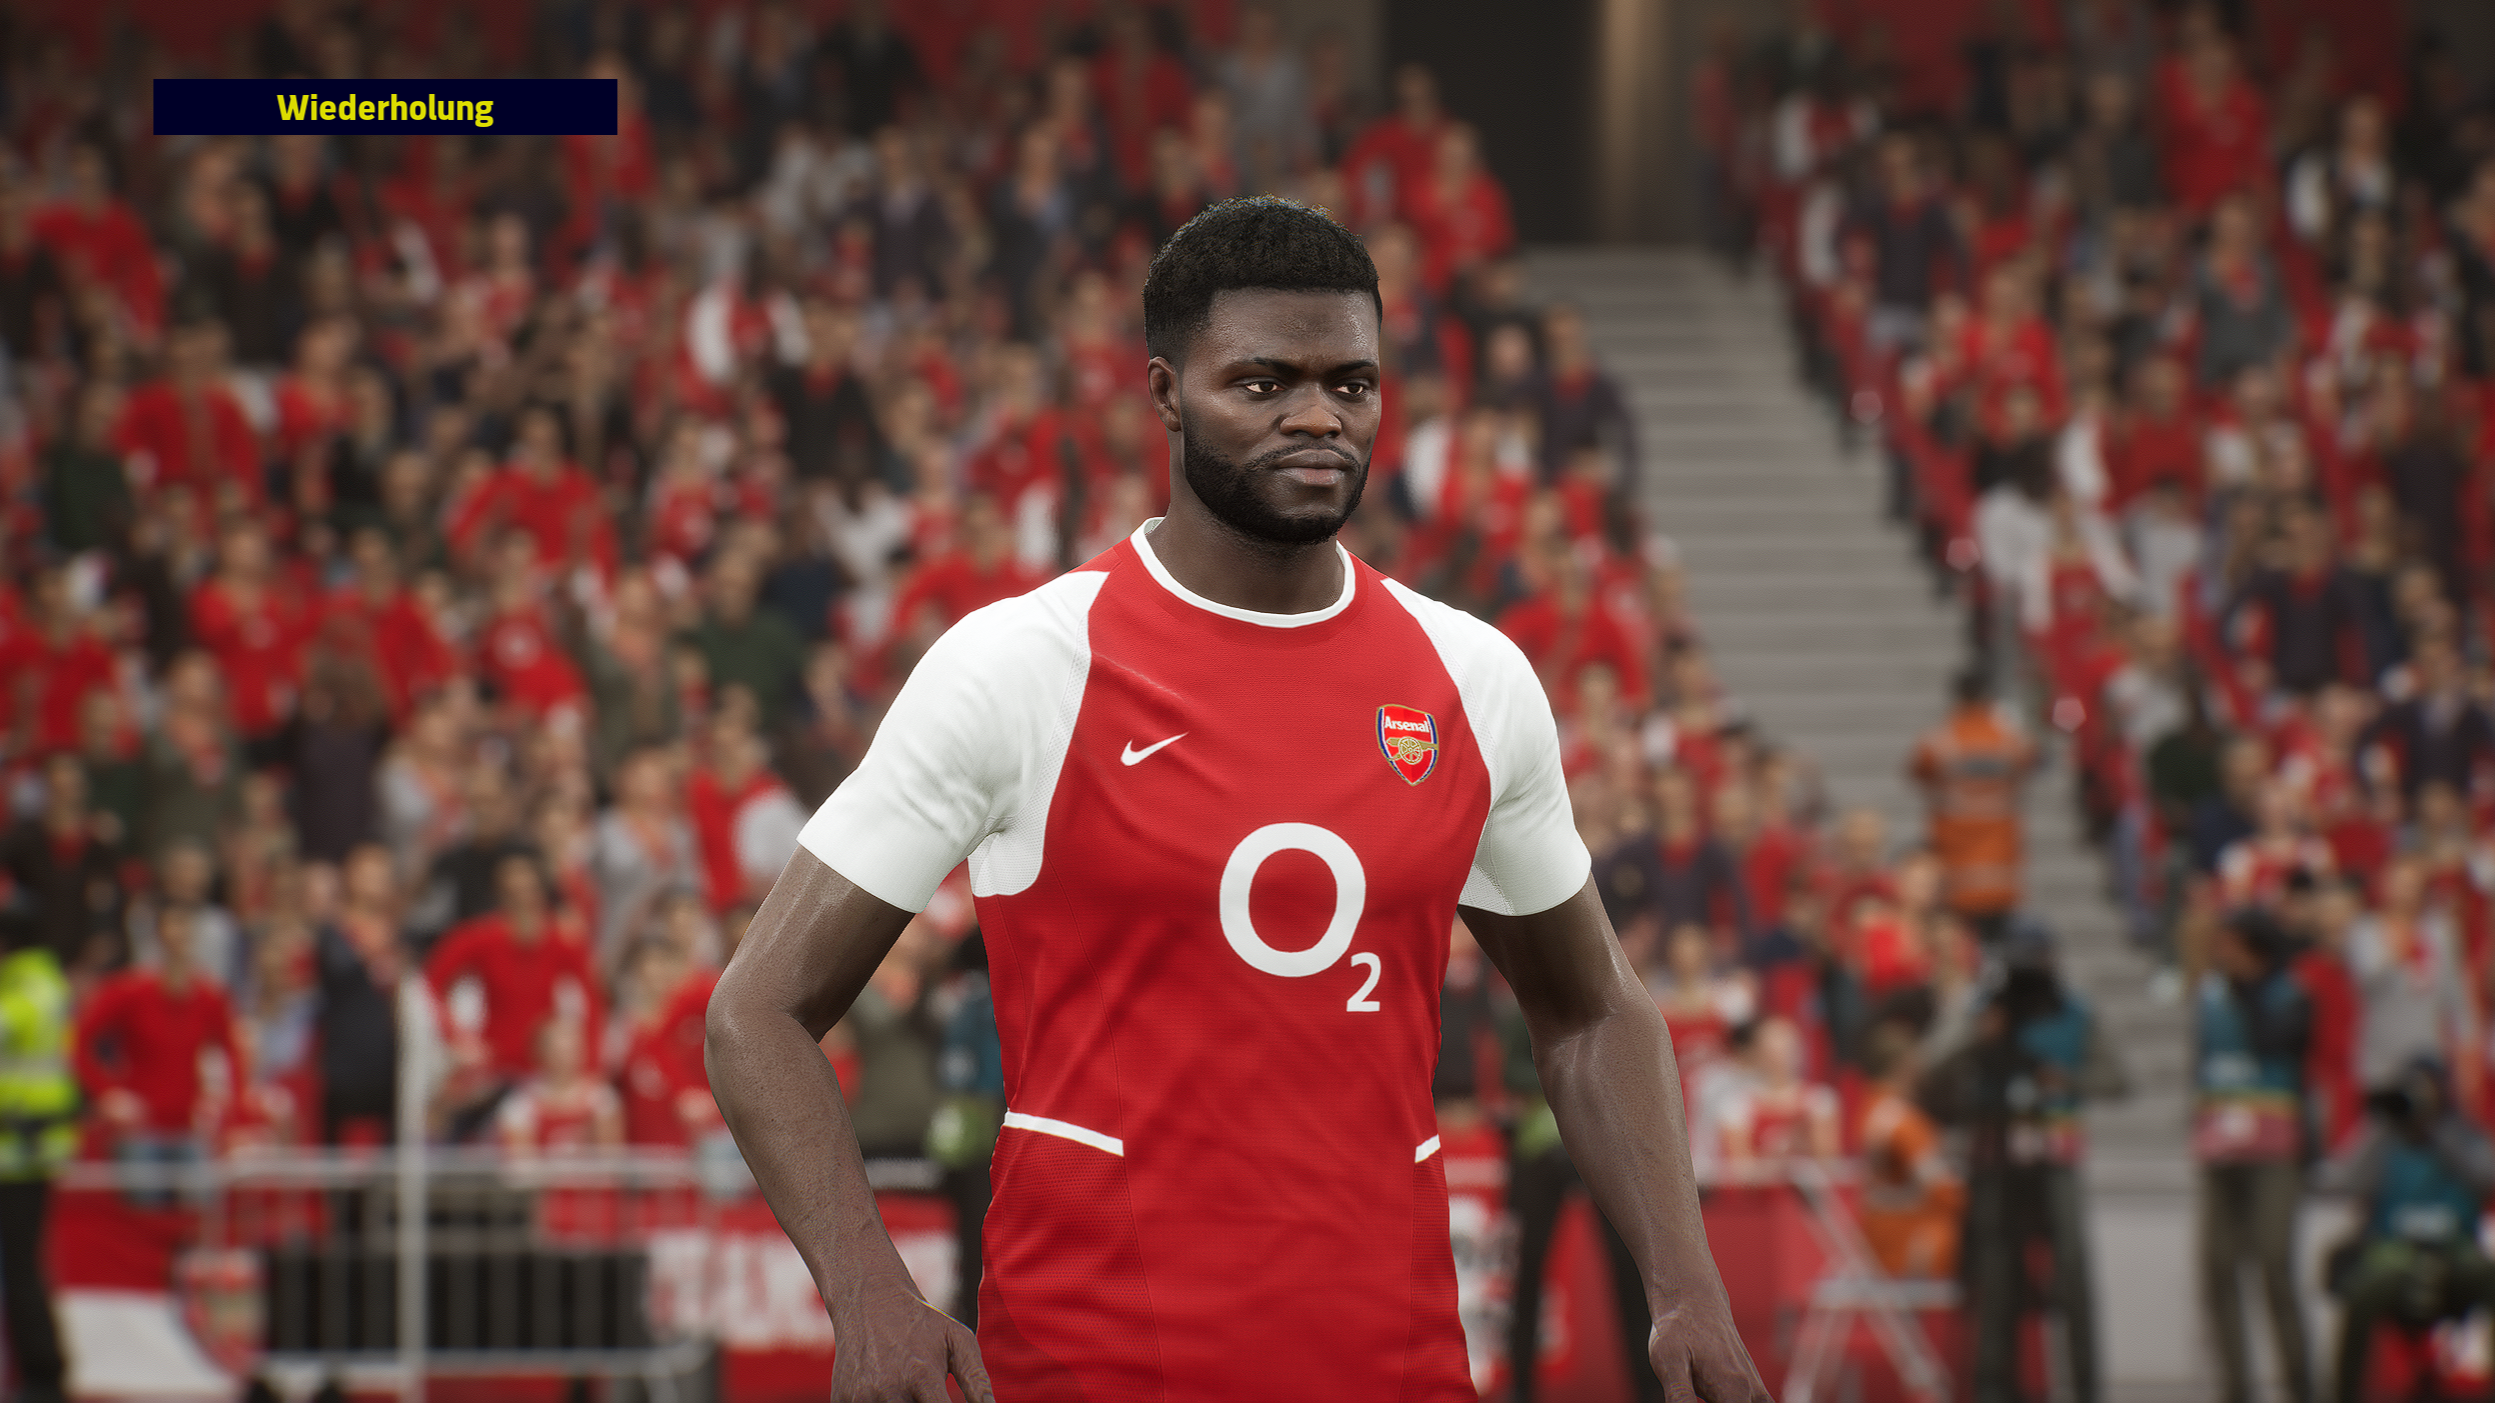 Arsenal classic kits PES 2021 and PES2020 [font adjustment guide